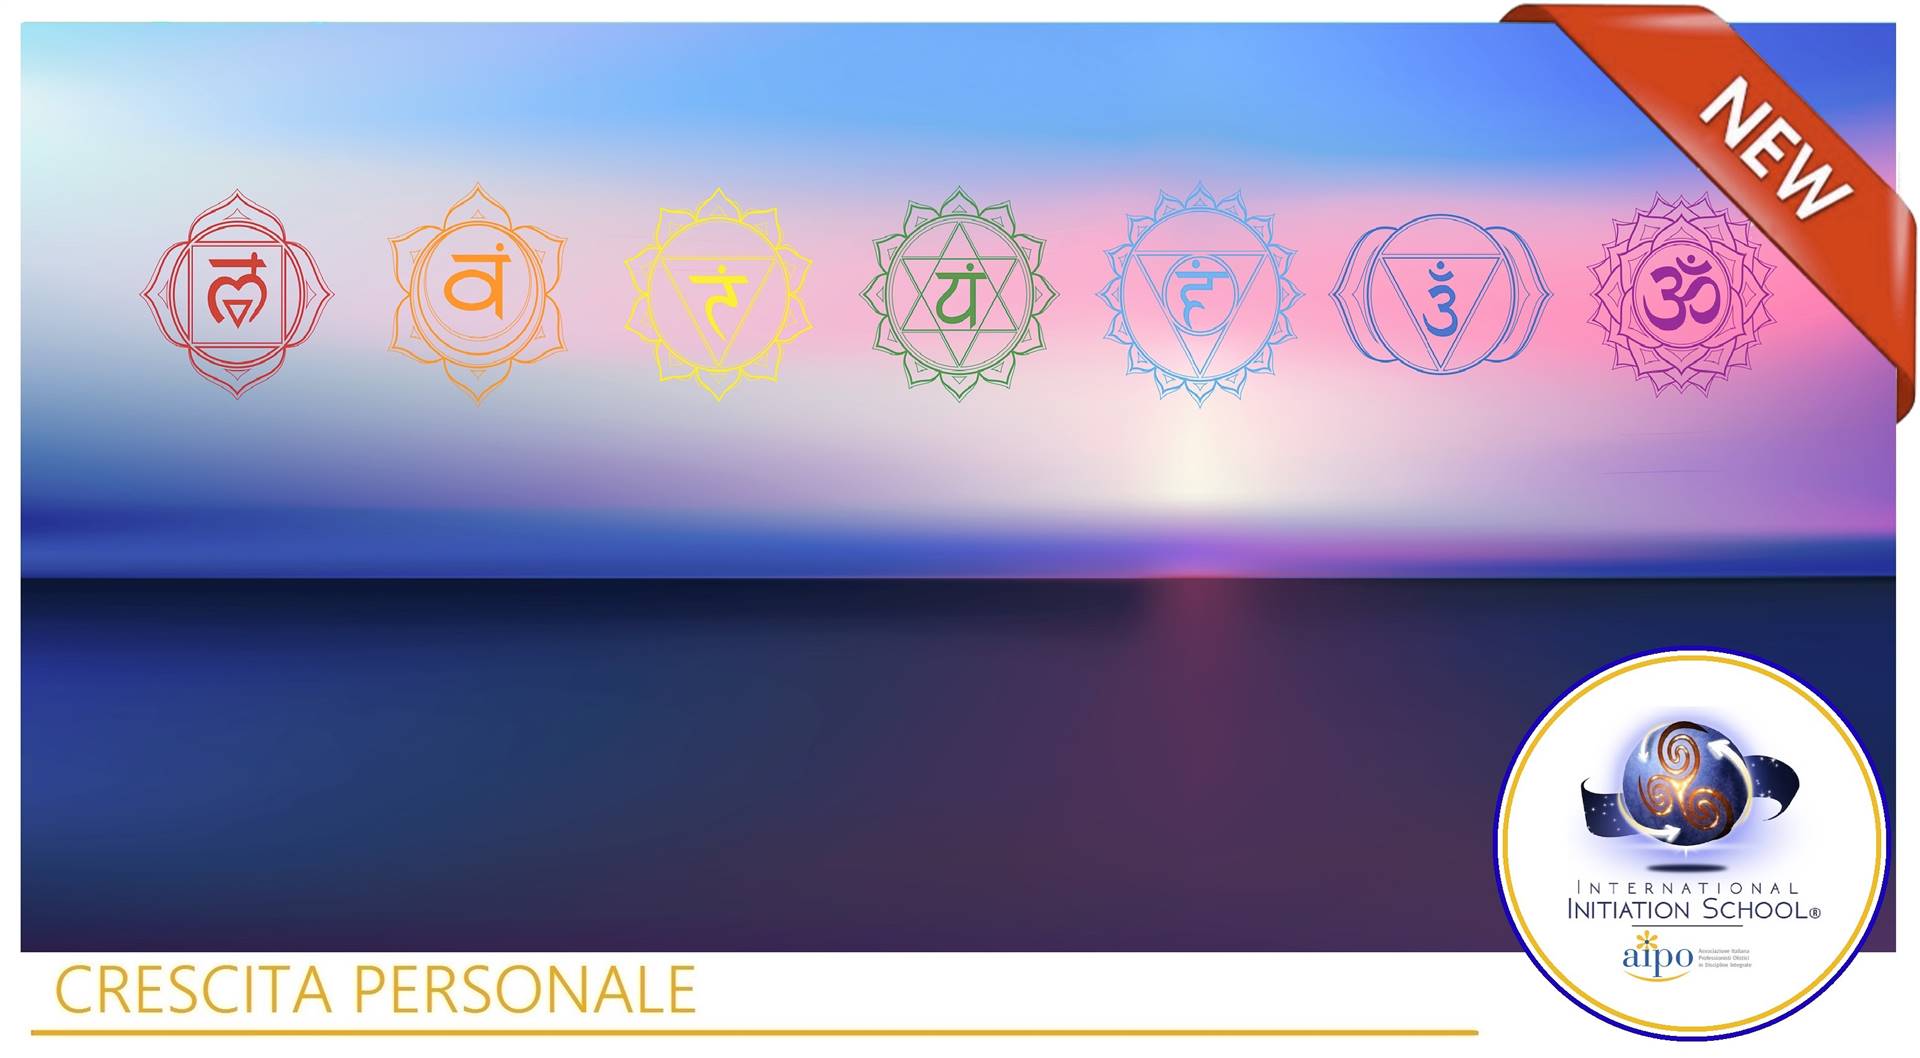 The 7 Chakras and Psyche